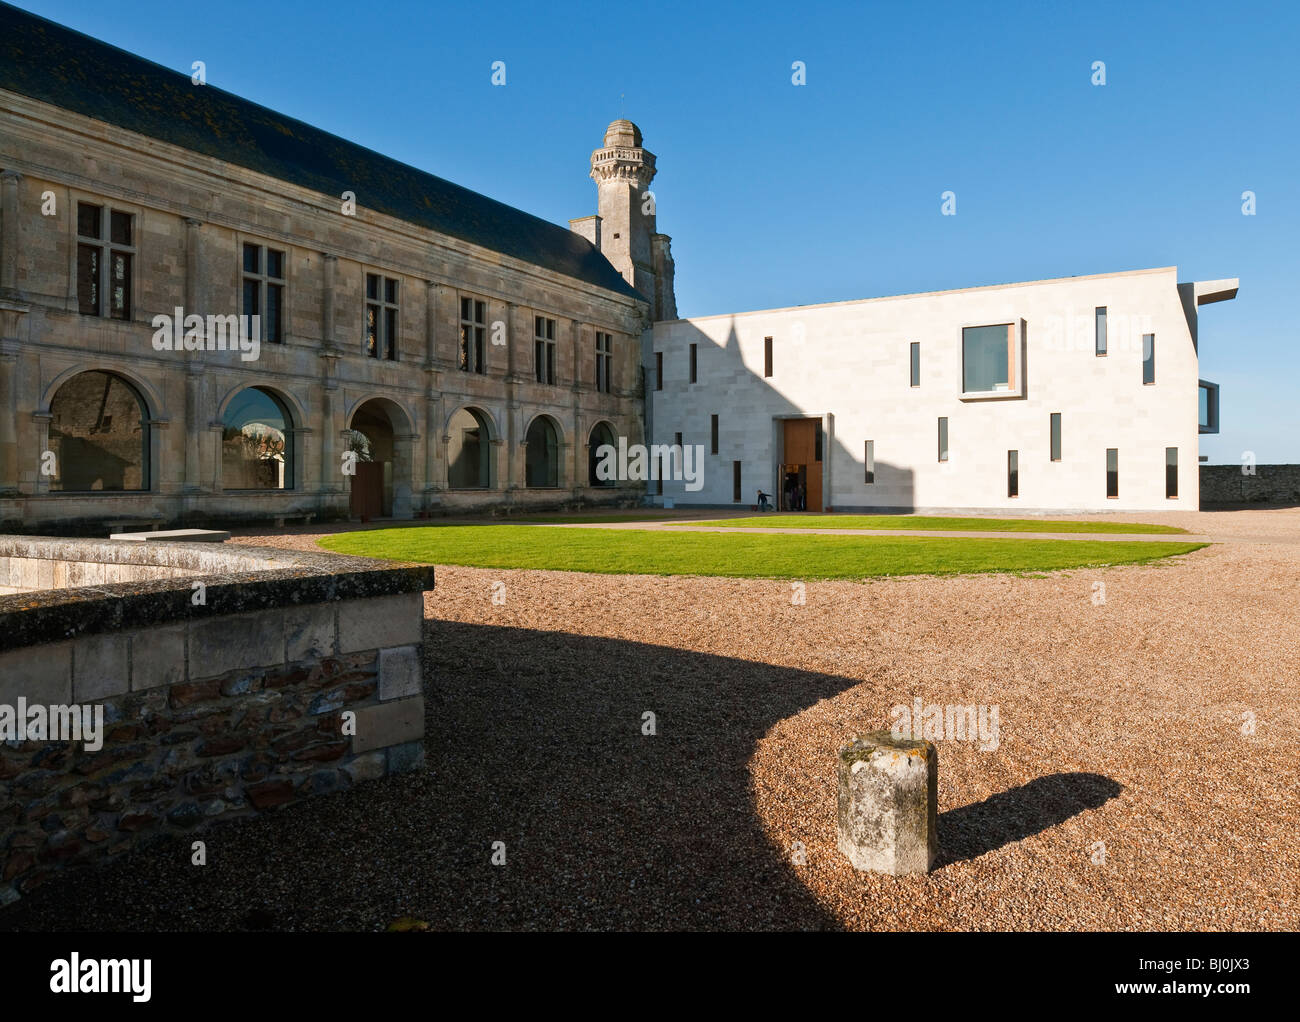 New modern archeology museum building, Le Grand-Pressigny, sud-Touraine, France. Stock Photo